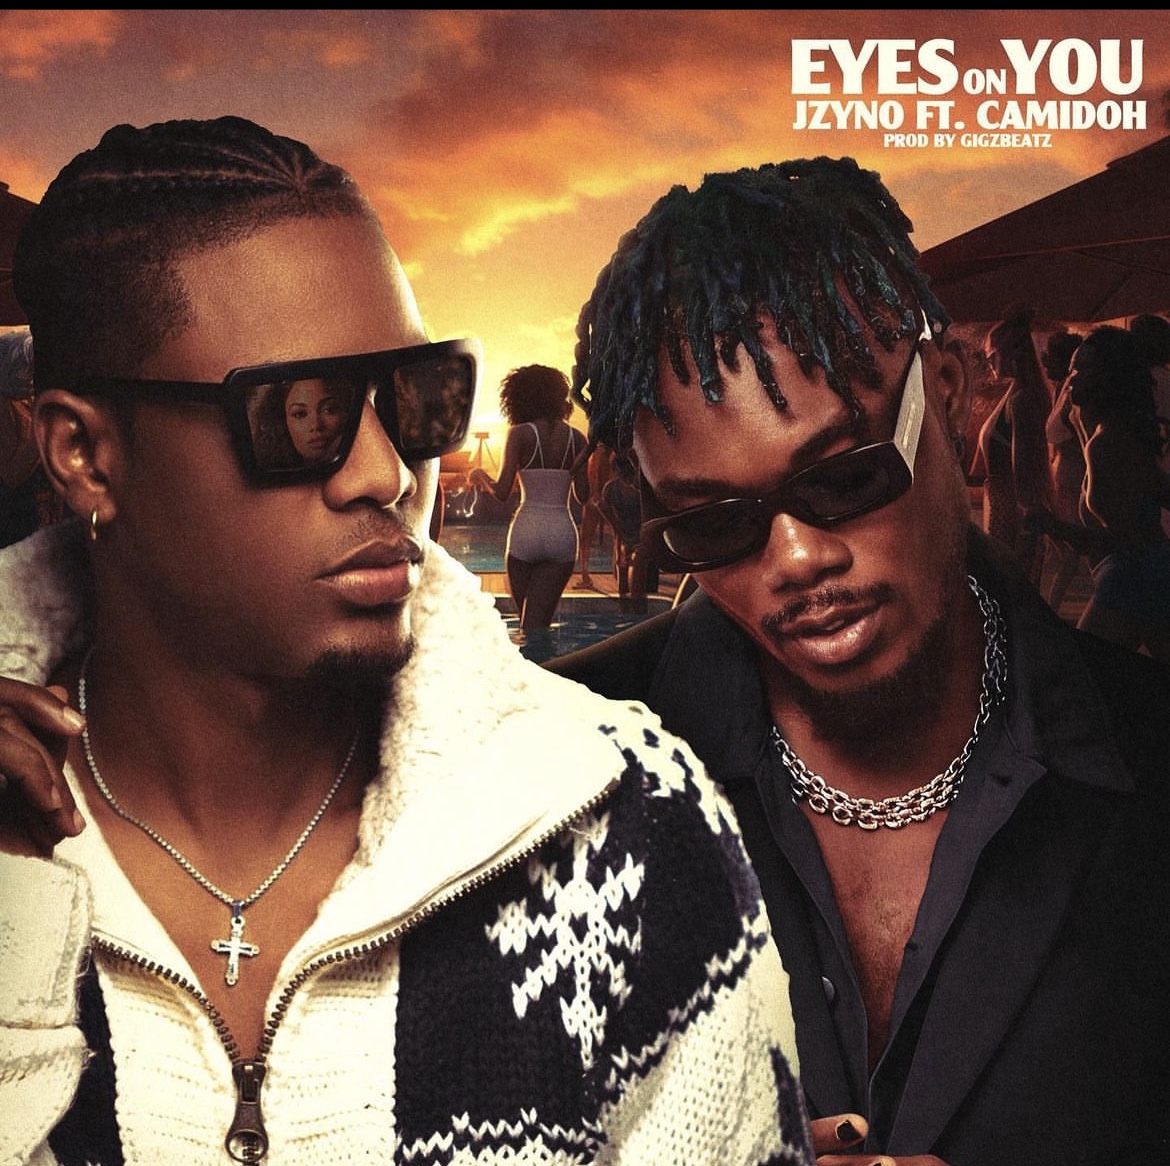 JZyNO releases new single titled “Eyes On You” ft. Camidoh